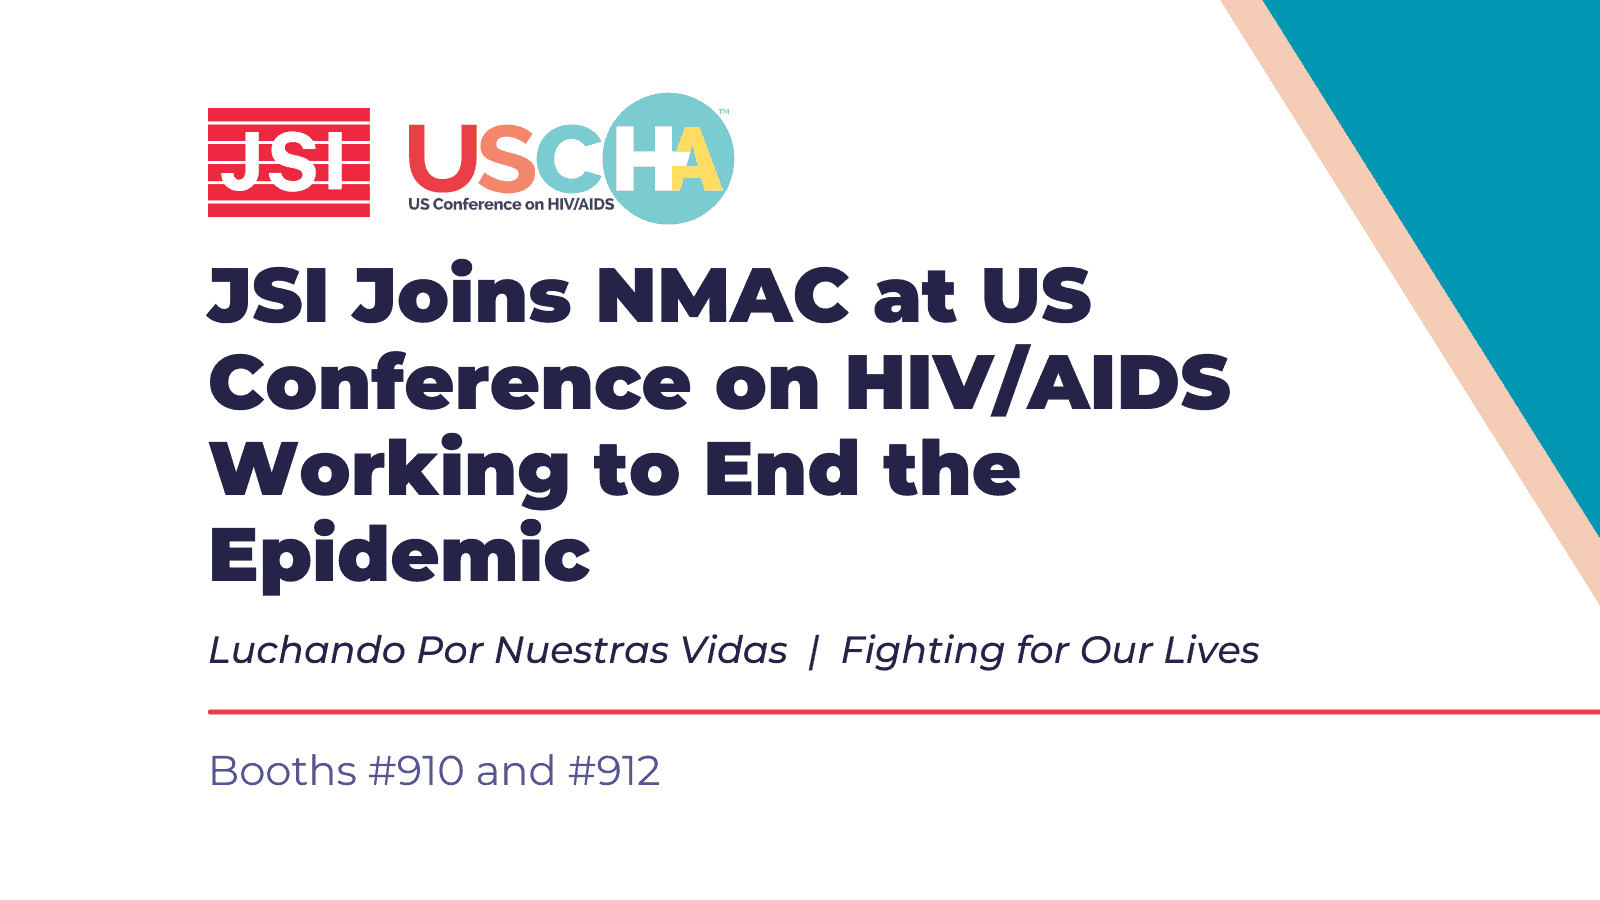 JSI Joins NMAC at US Conference on HIV/AIDS Working to End the Epidemic